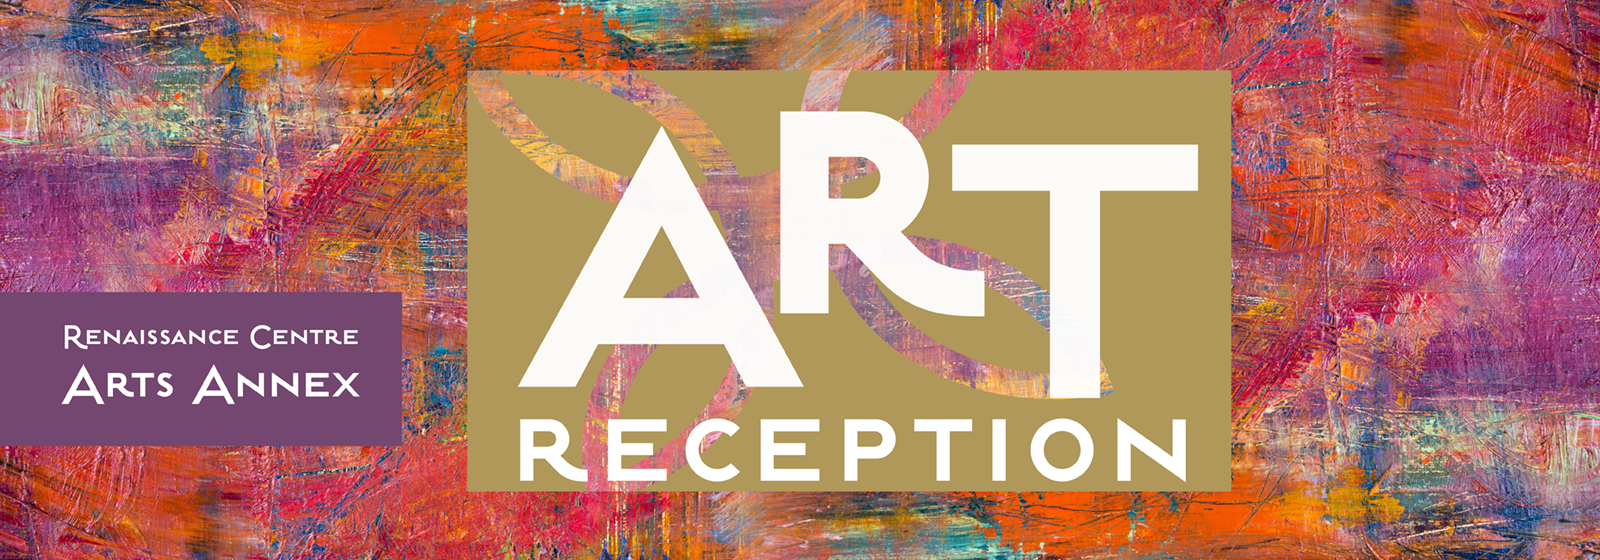 Free Art Reception February 9 6-8pm inside the Arts Annex (407 S. Brooks St. Wake Forest, NC)